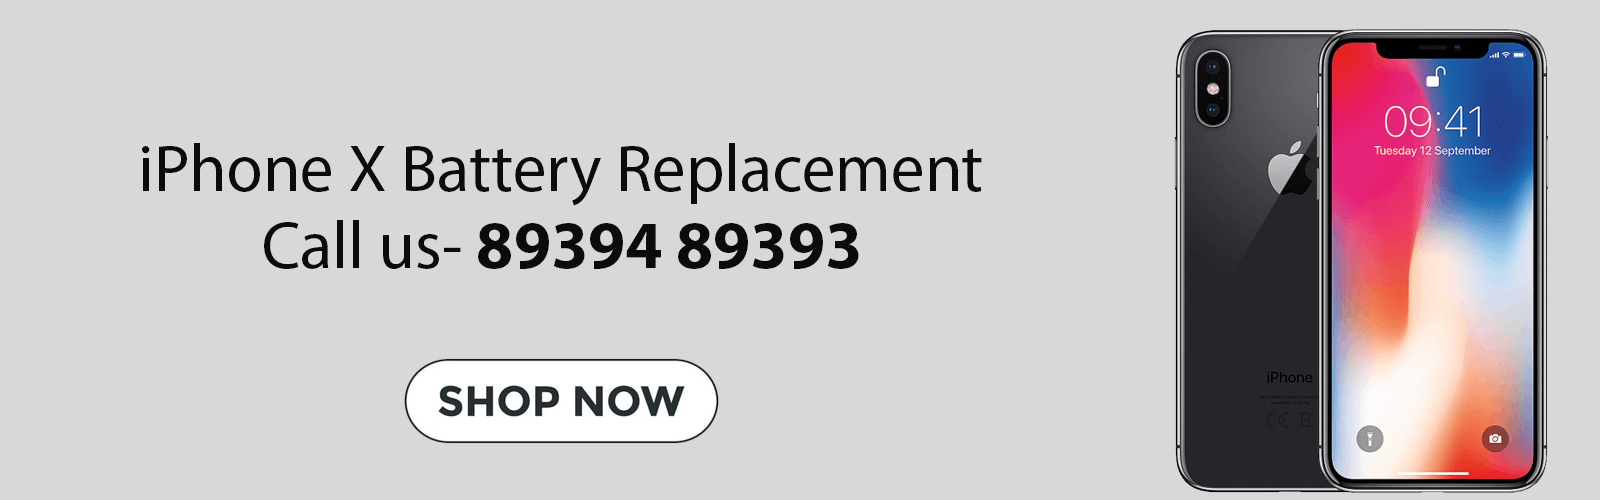 iPhone X Battery Replacement Price Chennai